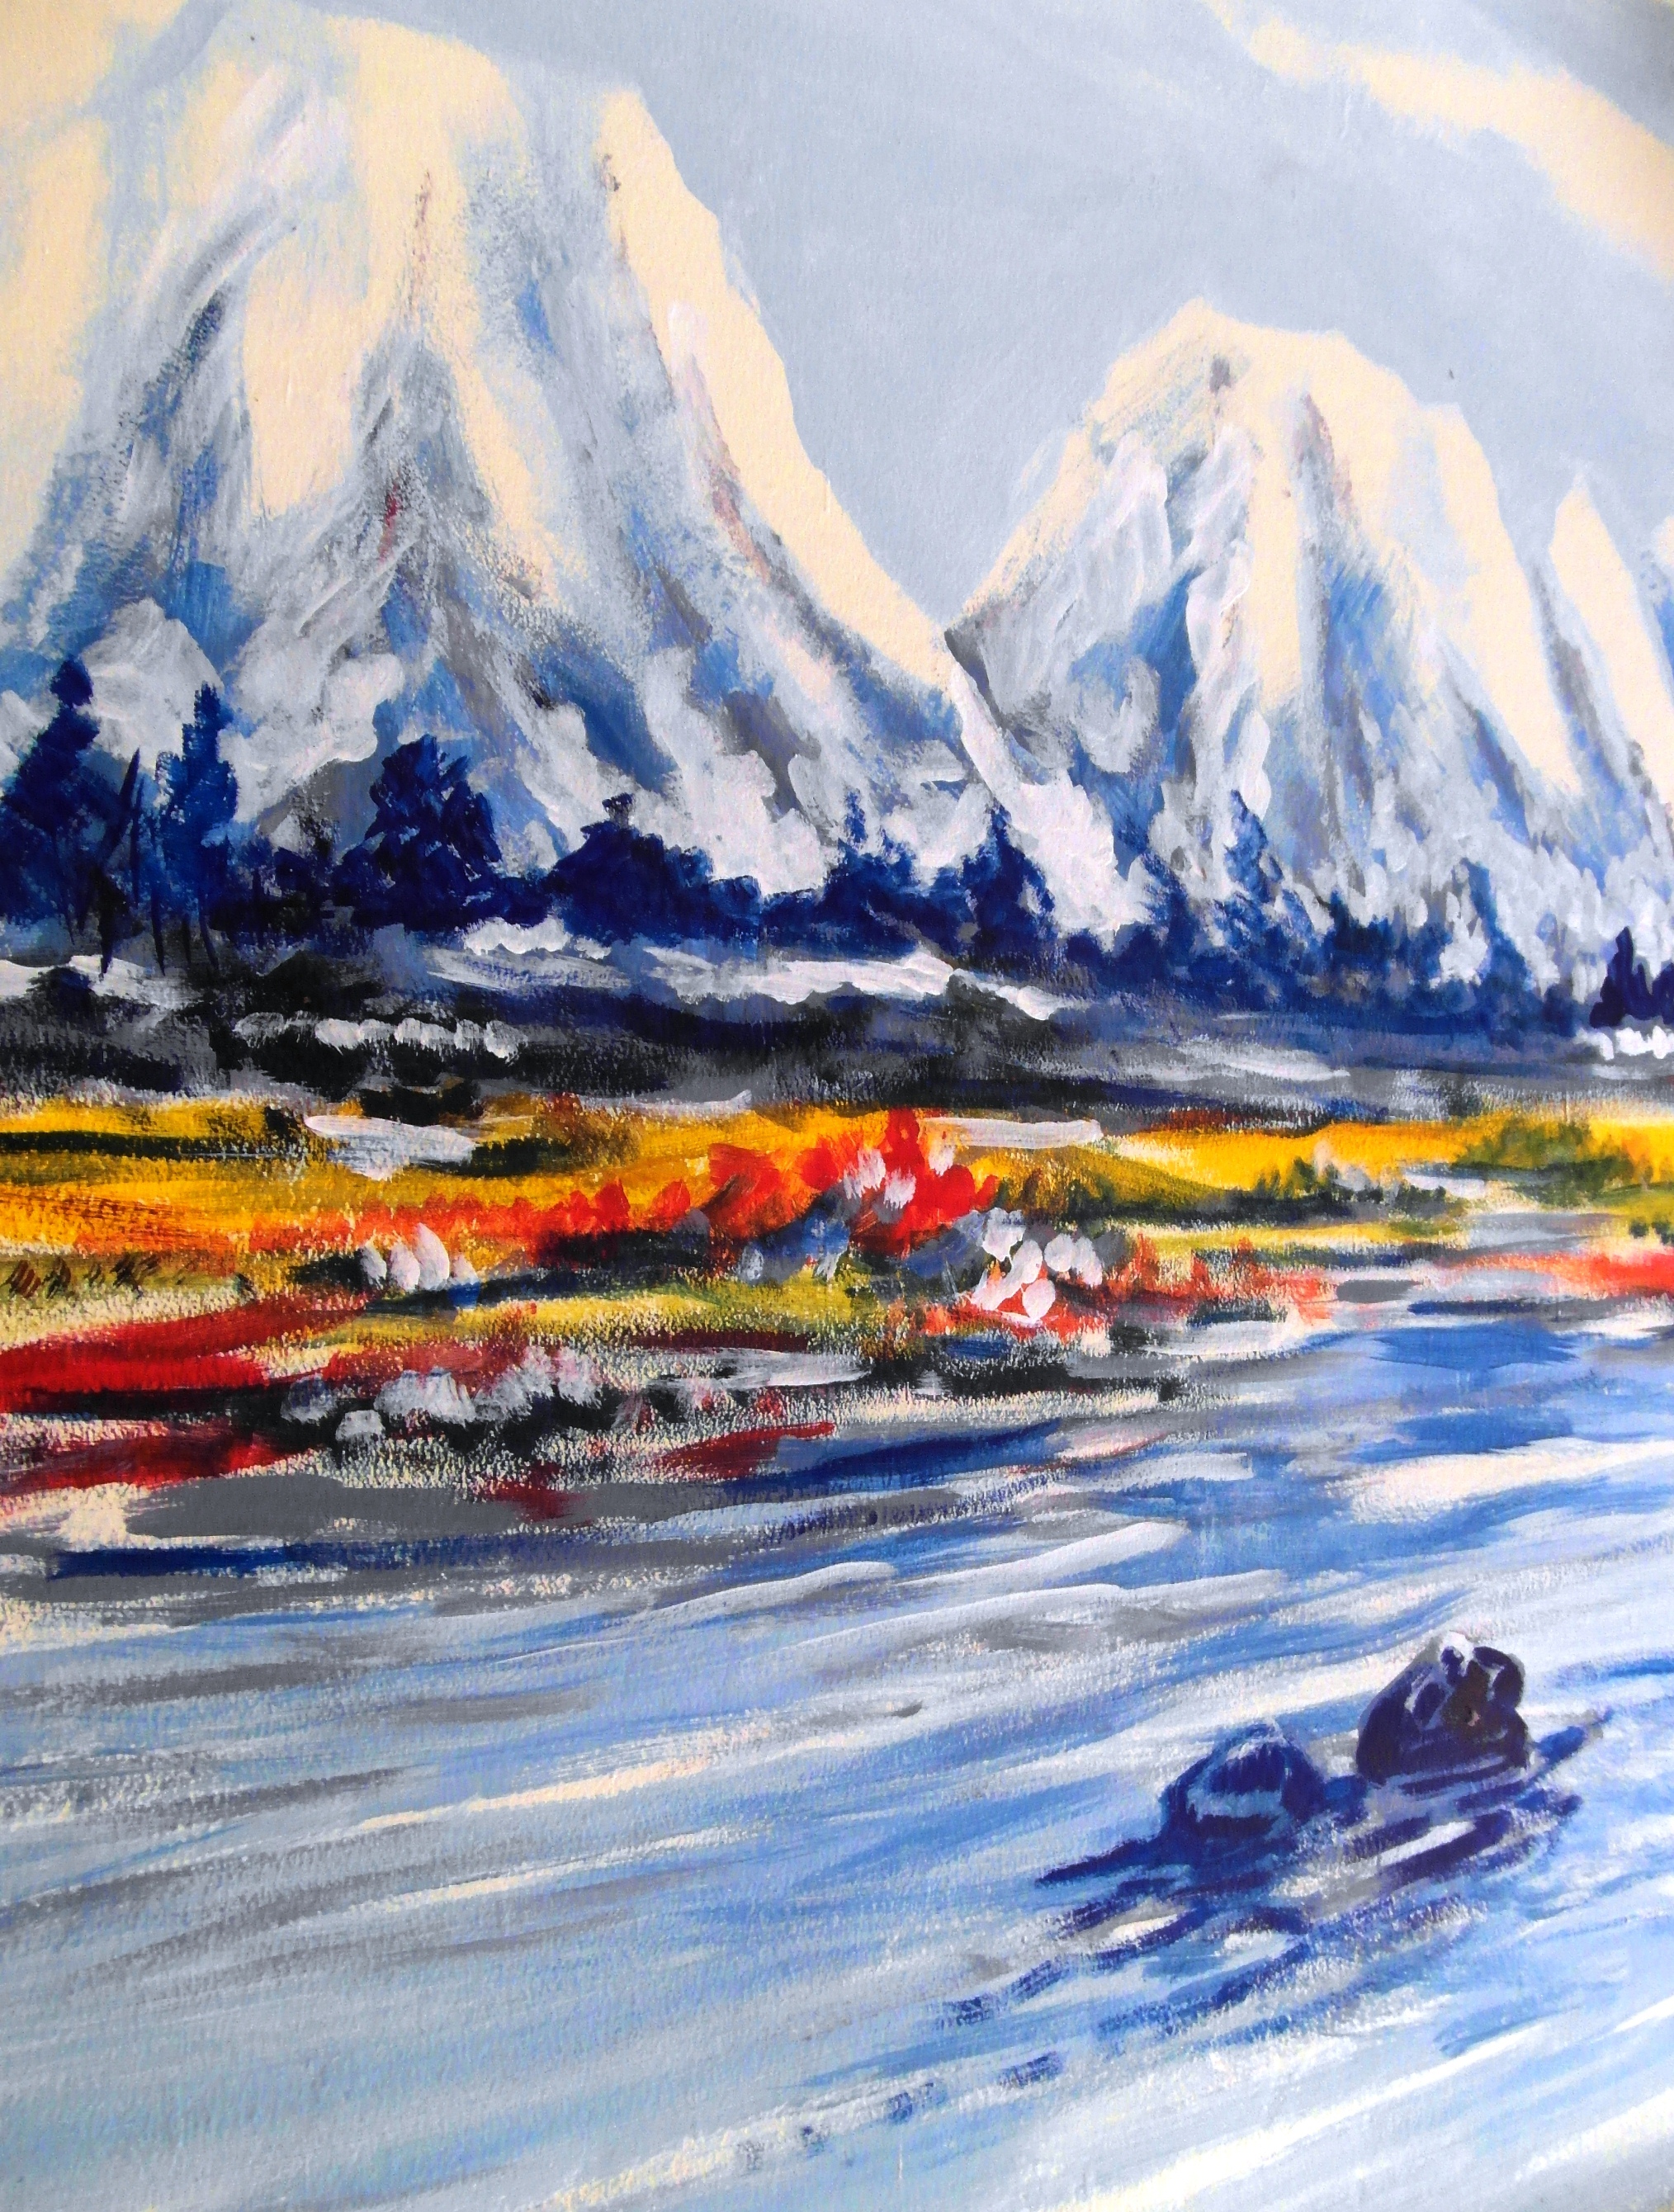 Snowy mountain and river scene photo